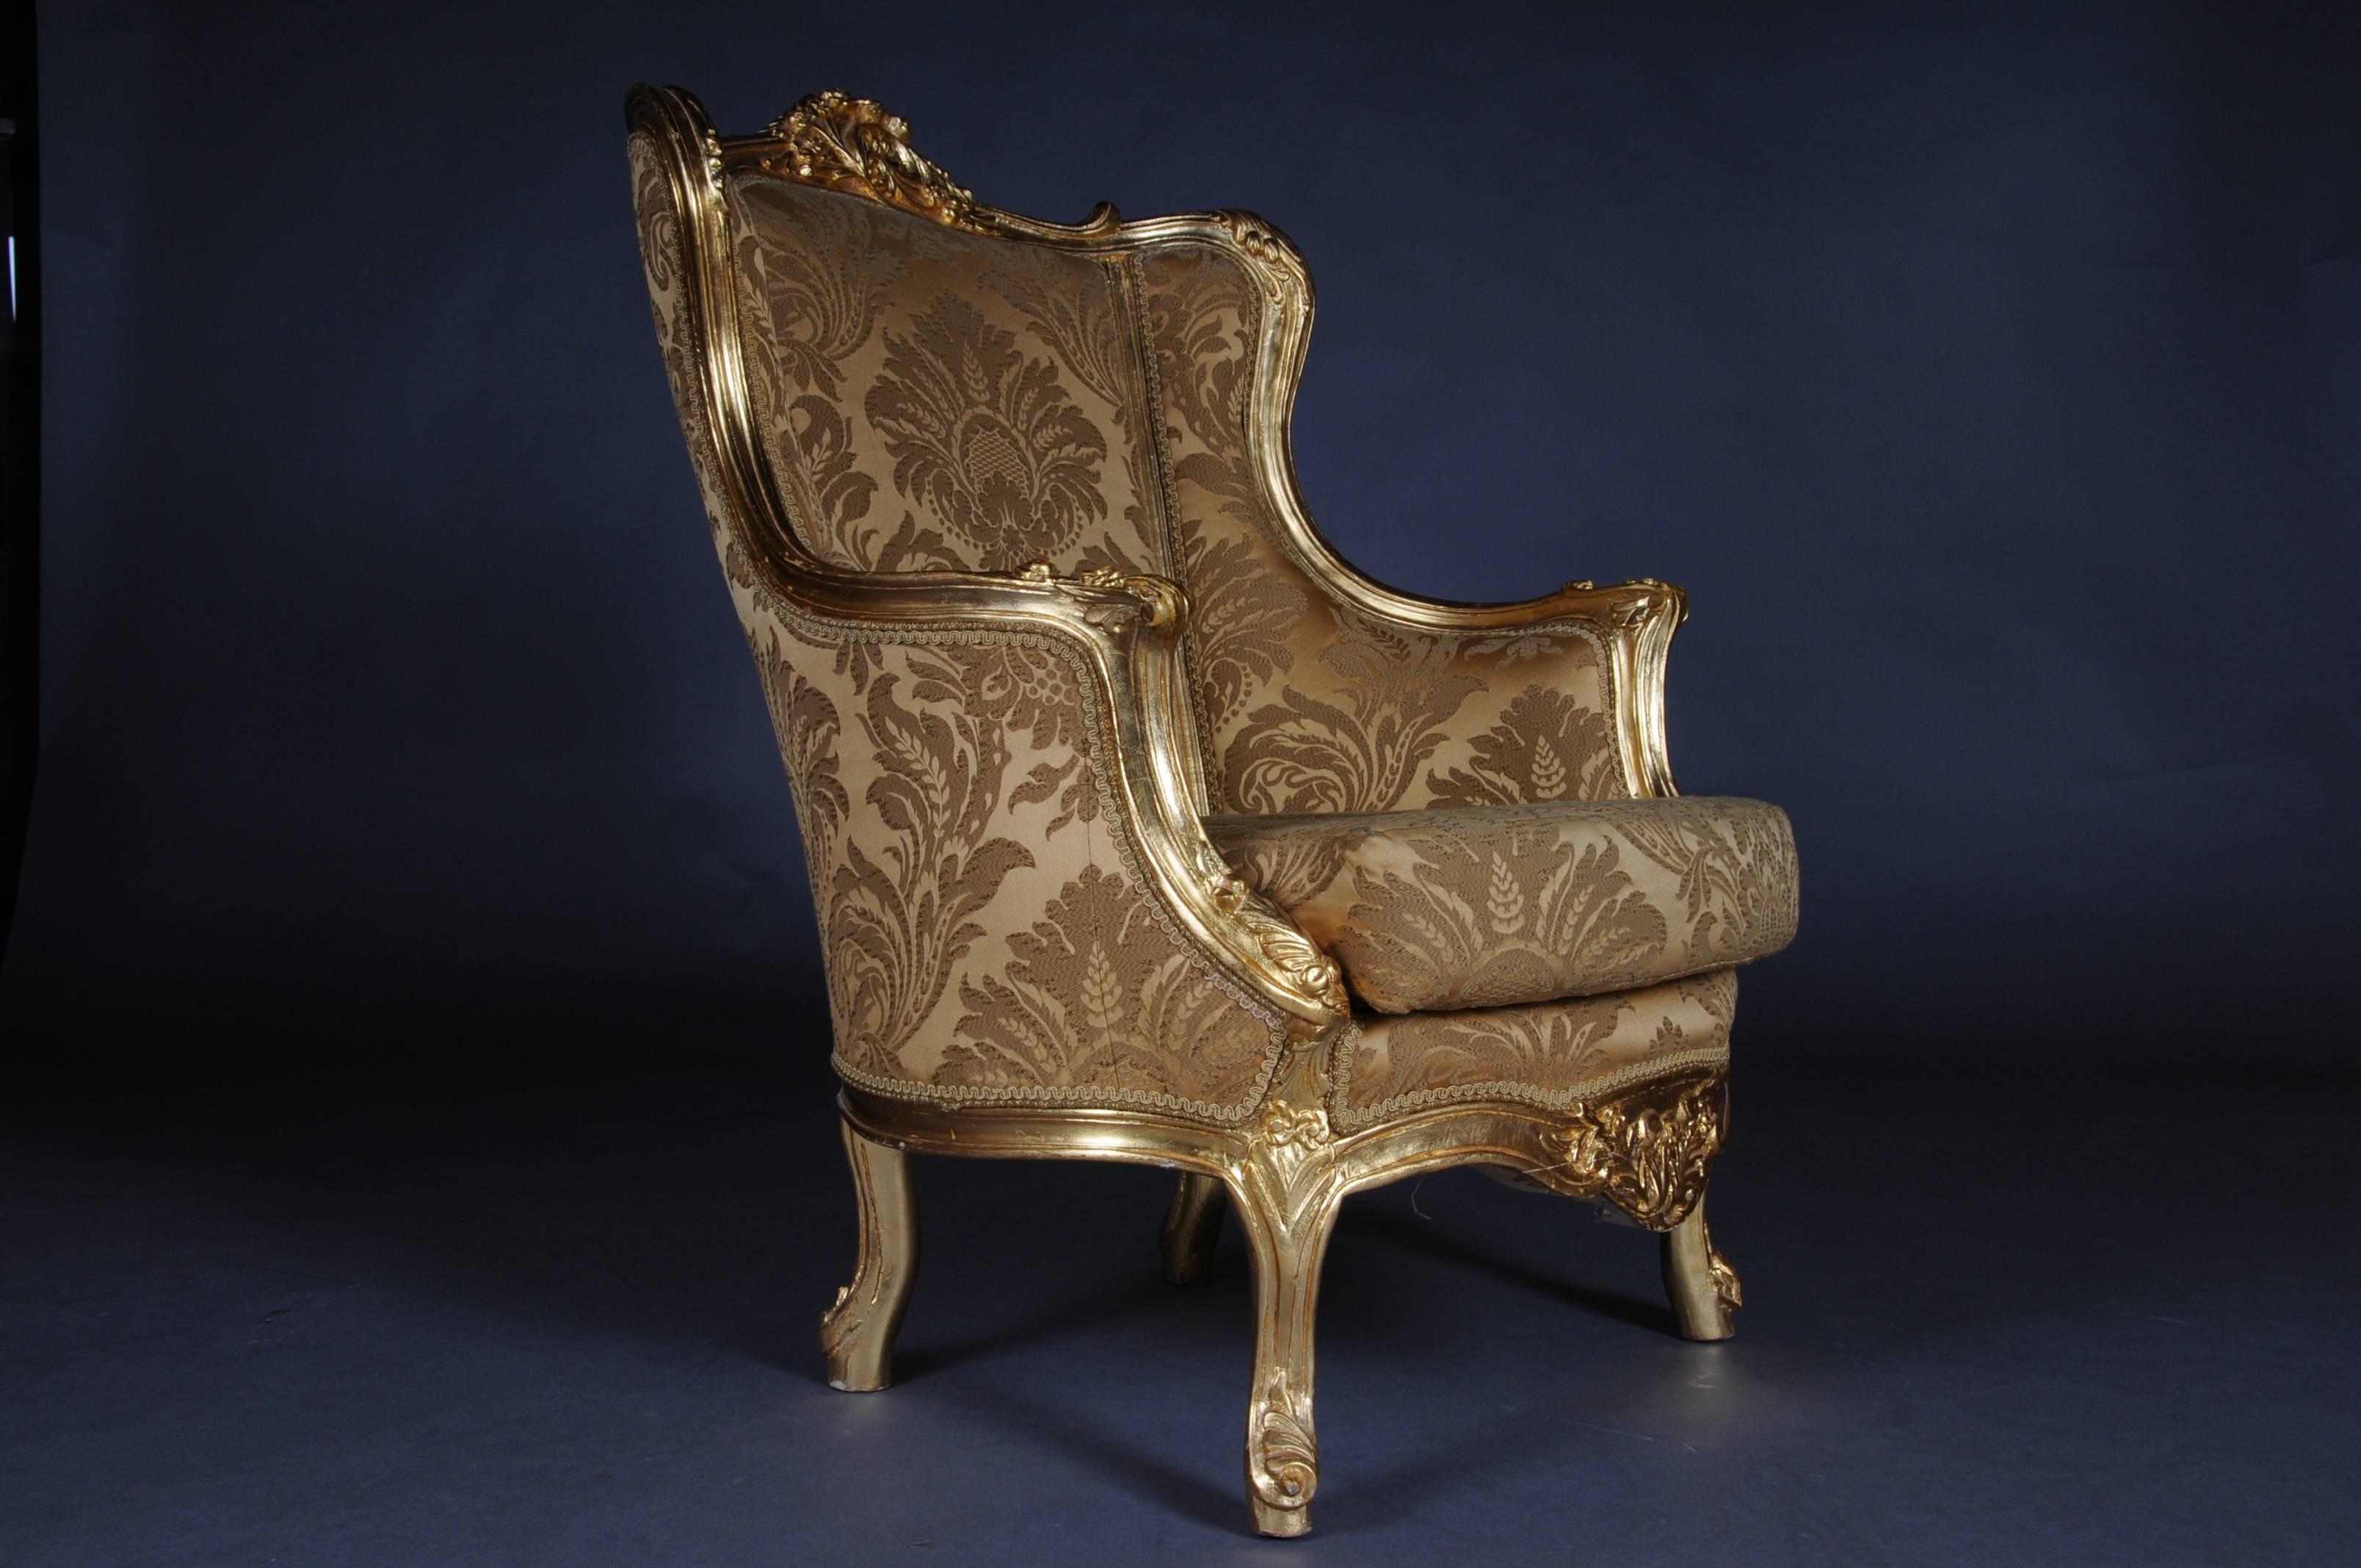 Solid beechwood, carved and gold frame. Semi-circular ascending backrest framing with Rocaillon crowning. Passive, carved frame. Slightly bent frame on curly legs. The seat and backrest are treated with a Classic, Classic upholstery, removable seat.